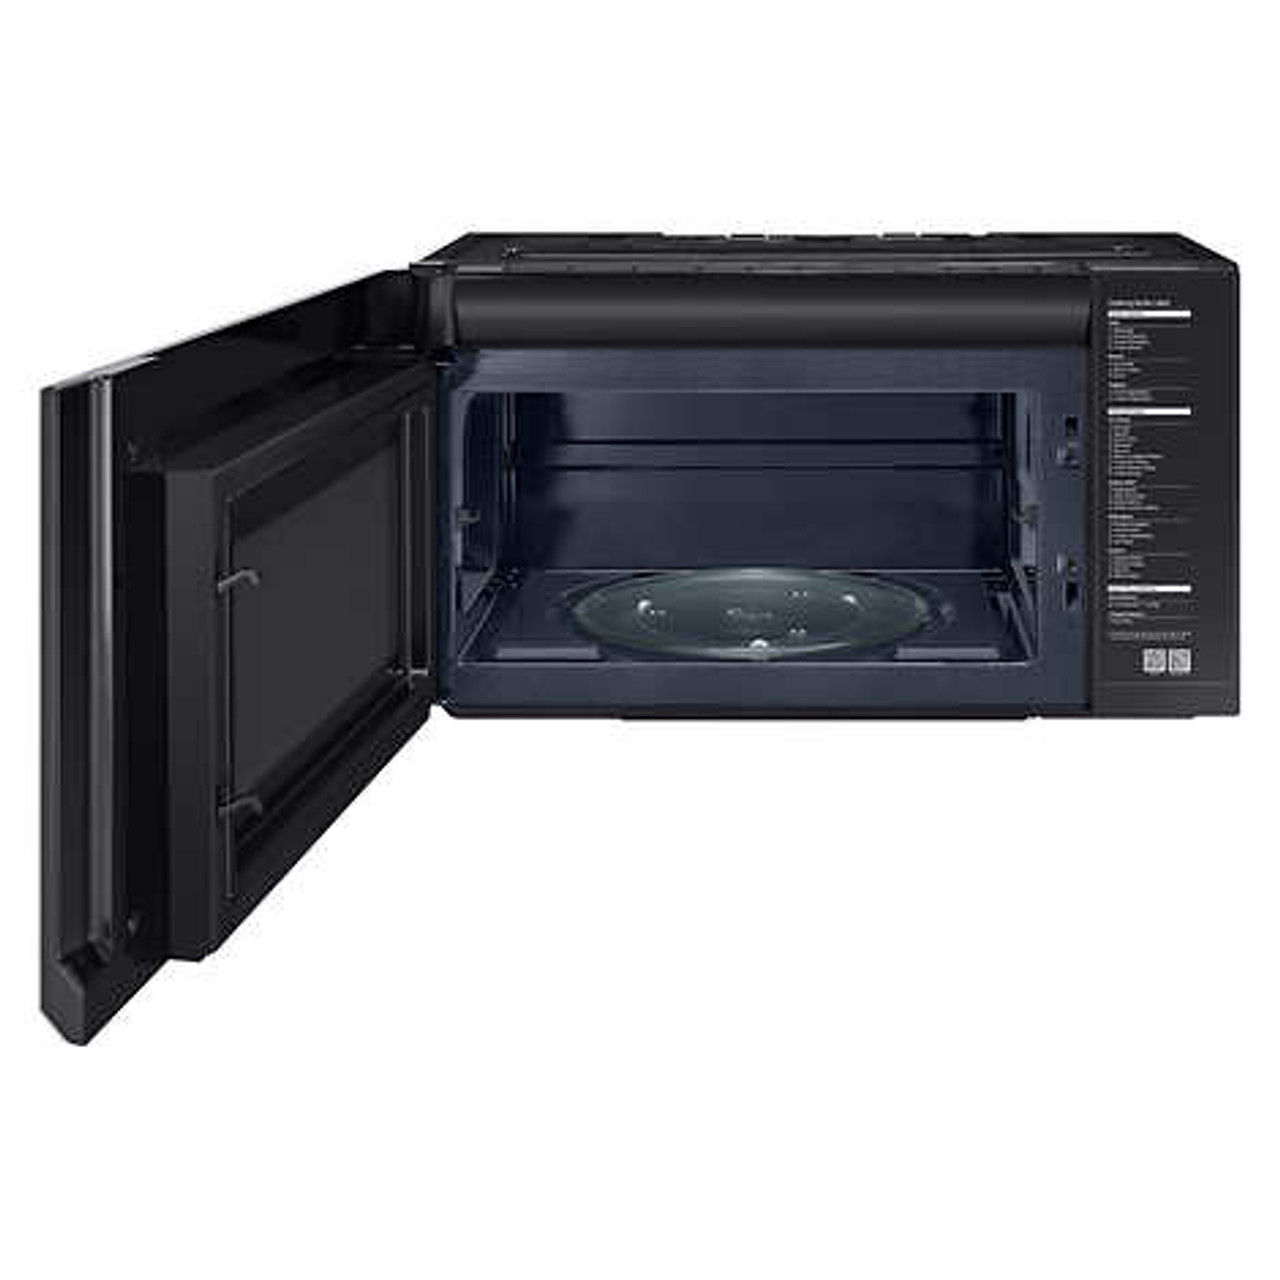 Samsung 2.1 cu. ft. Stainless Steel Over the Range Microwave - Powerful and Stylish Kitchen Upgrade
- Chicken Pieces